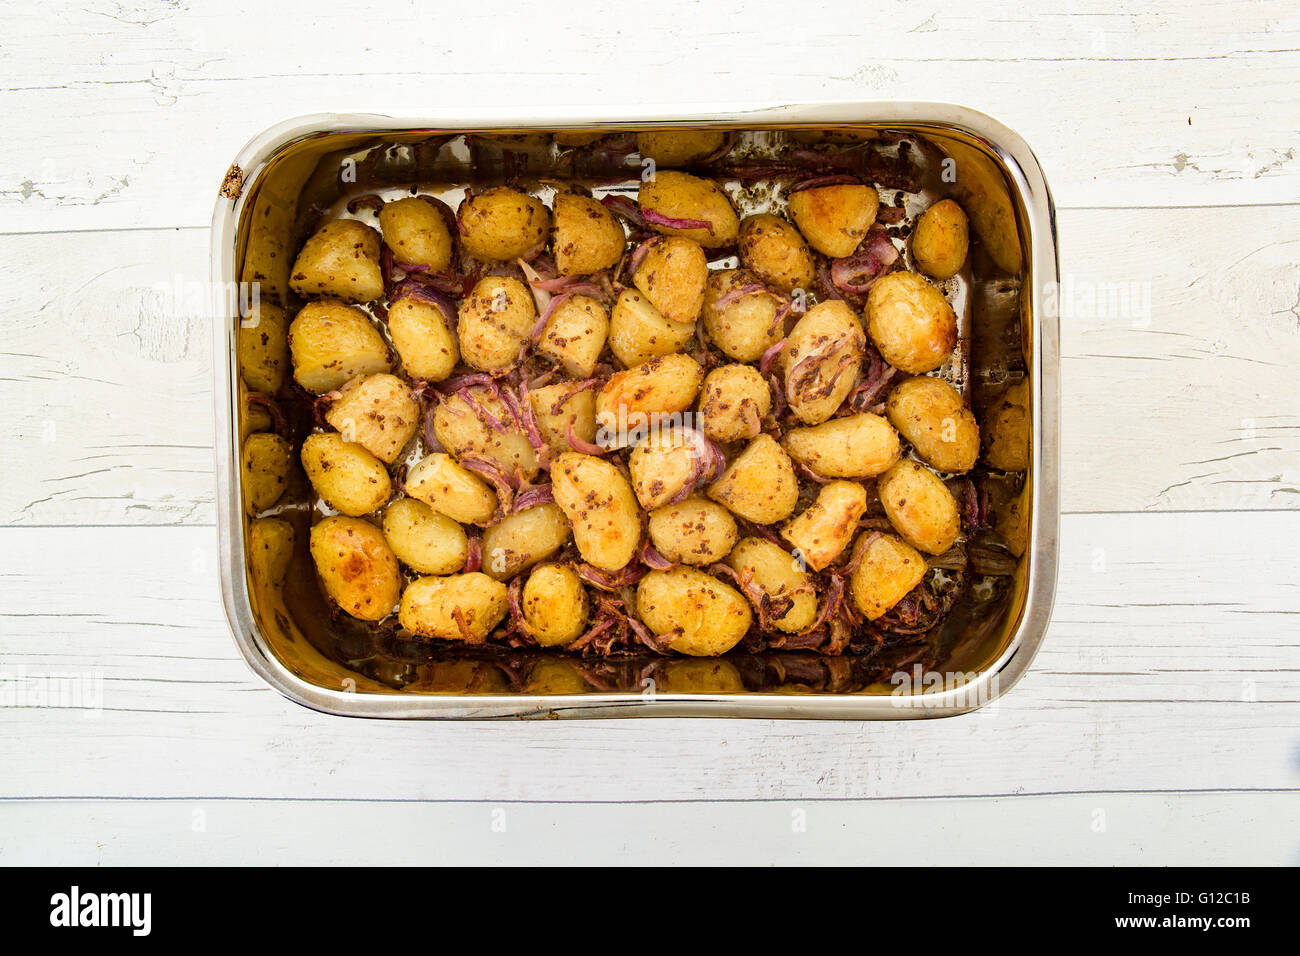 mustard crusted new potatoes with shallots in a dish on a rustic wooden table Stock Photo